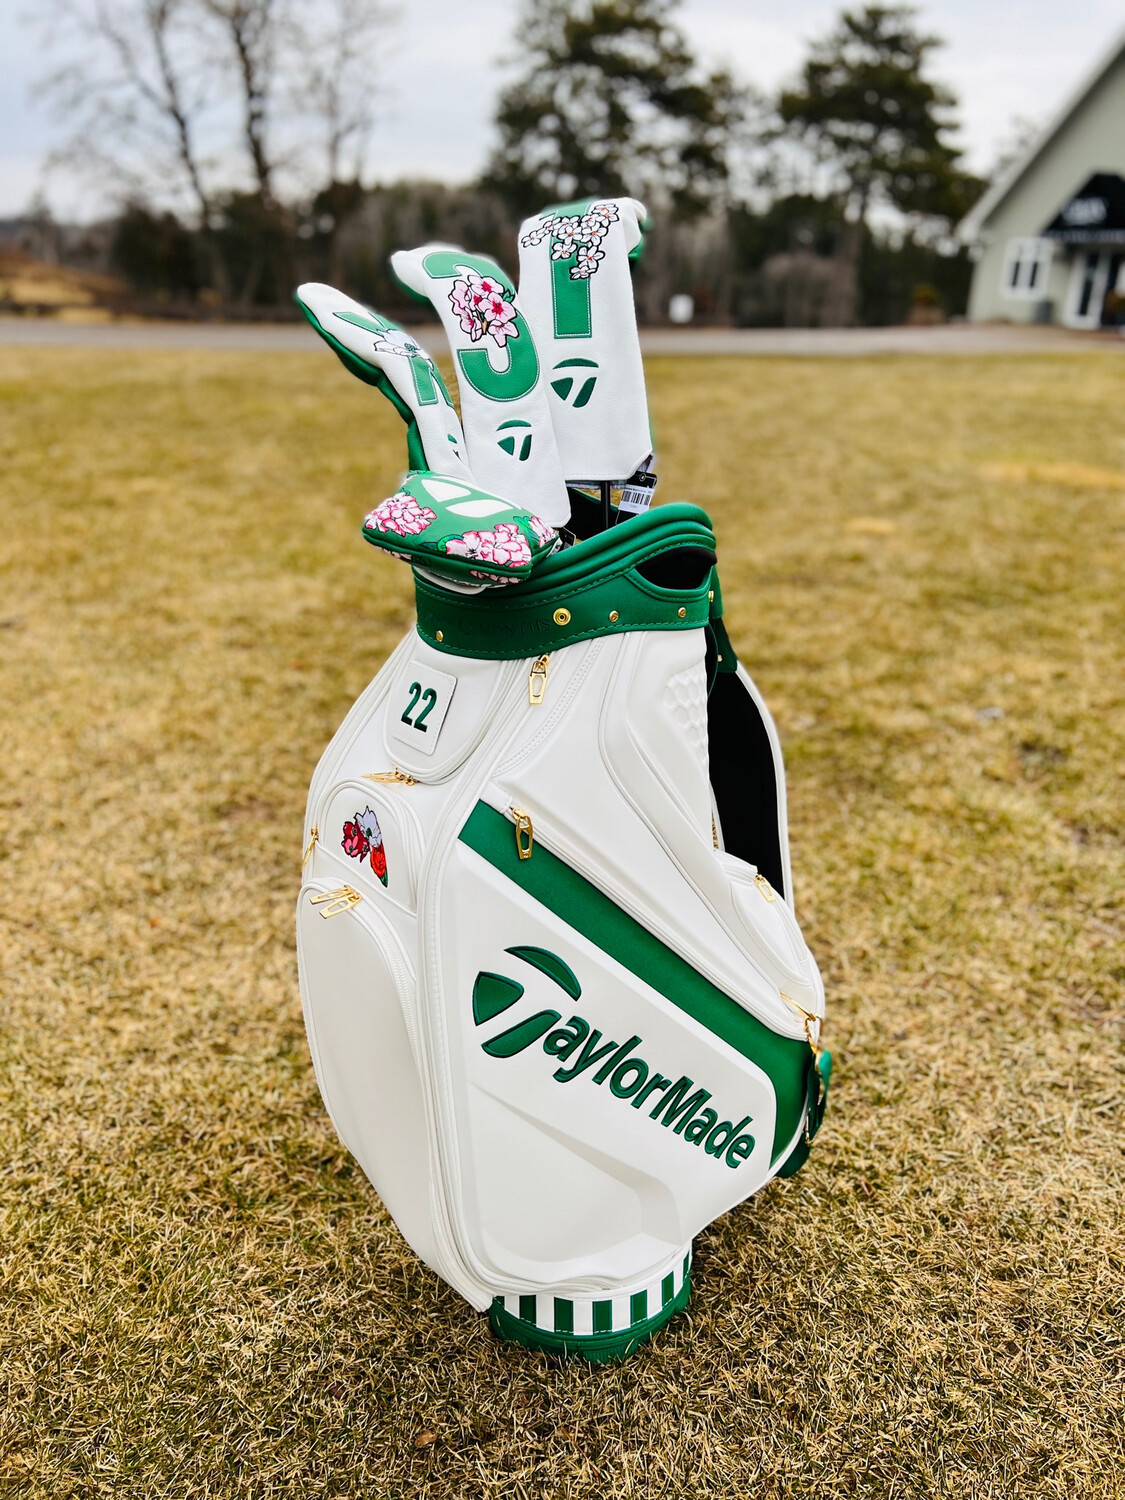 Taylormade Masters Staff Bag